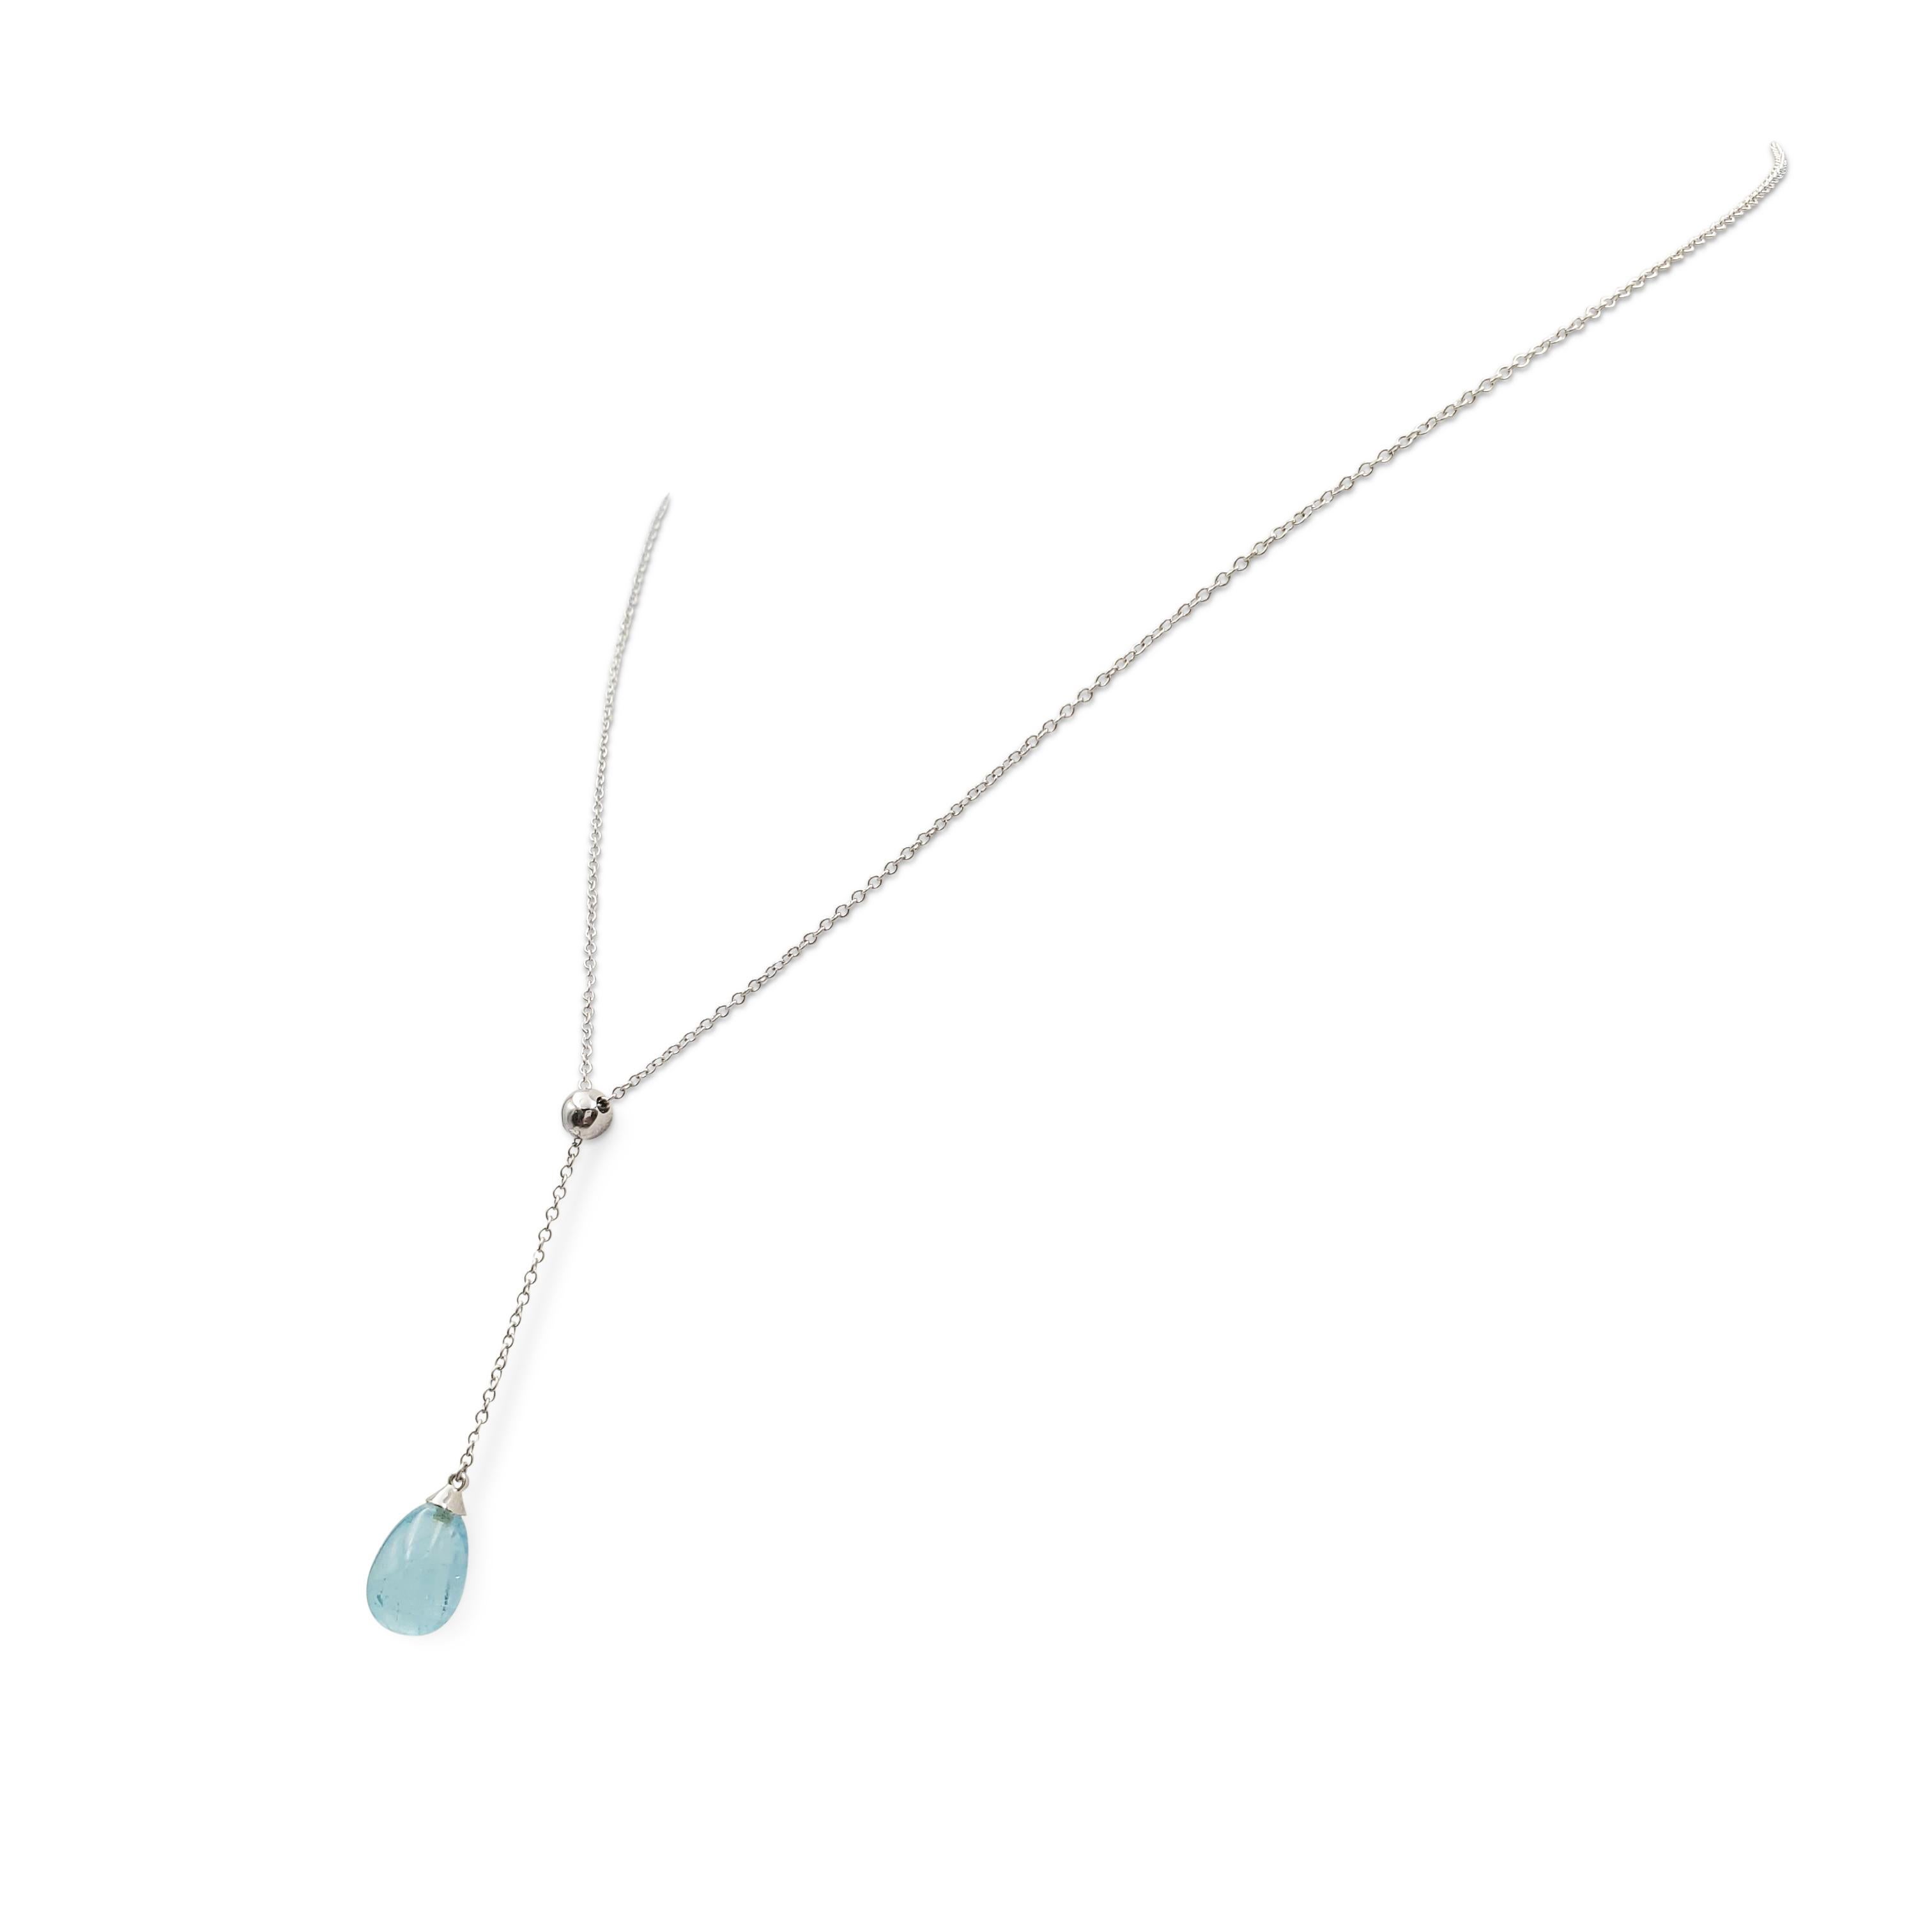 Contemporary Tiffany & Co. 'Rainbow Drop' White Gold and Aquamarine Necklace